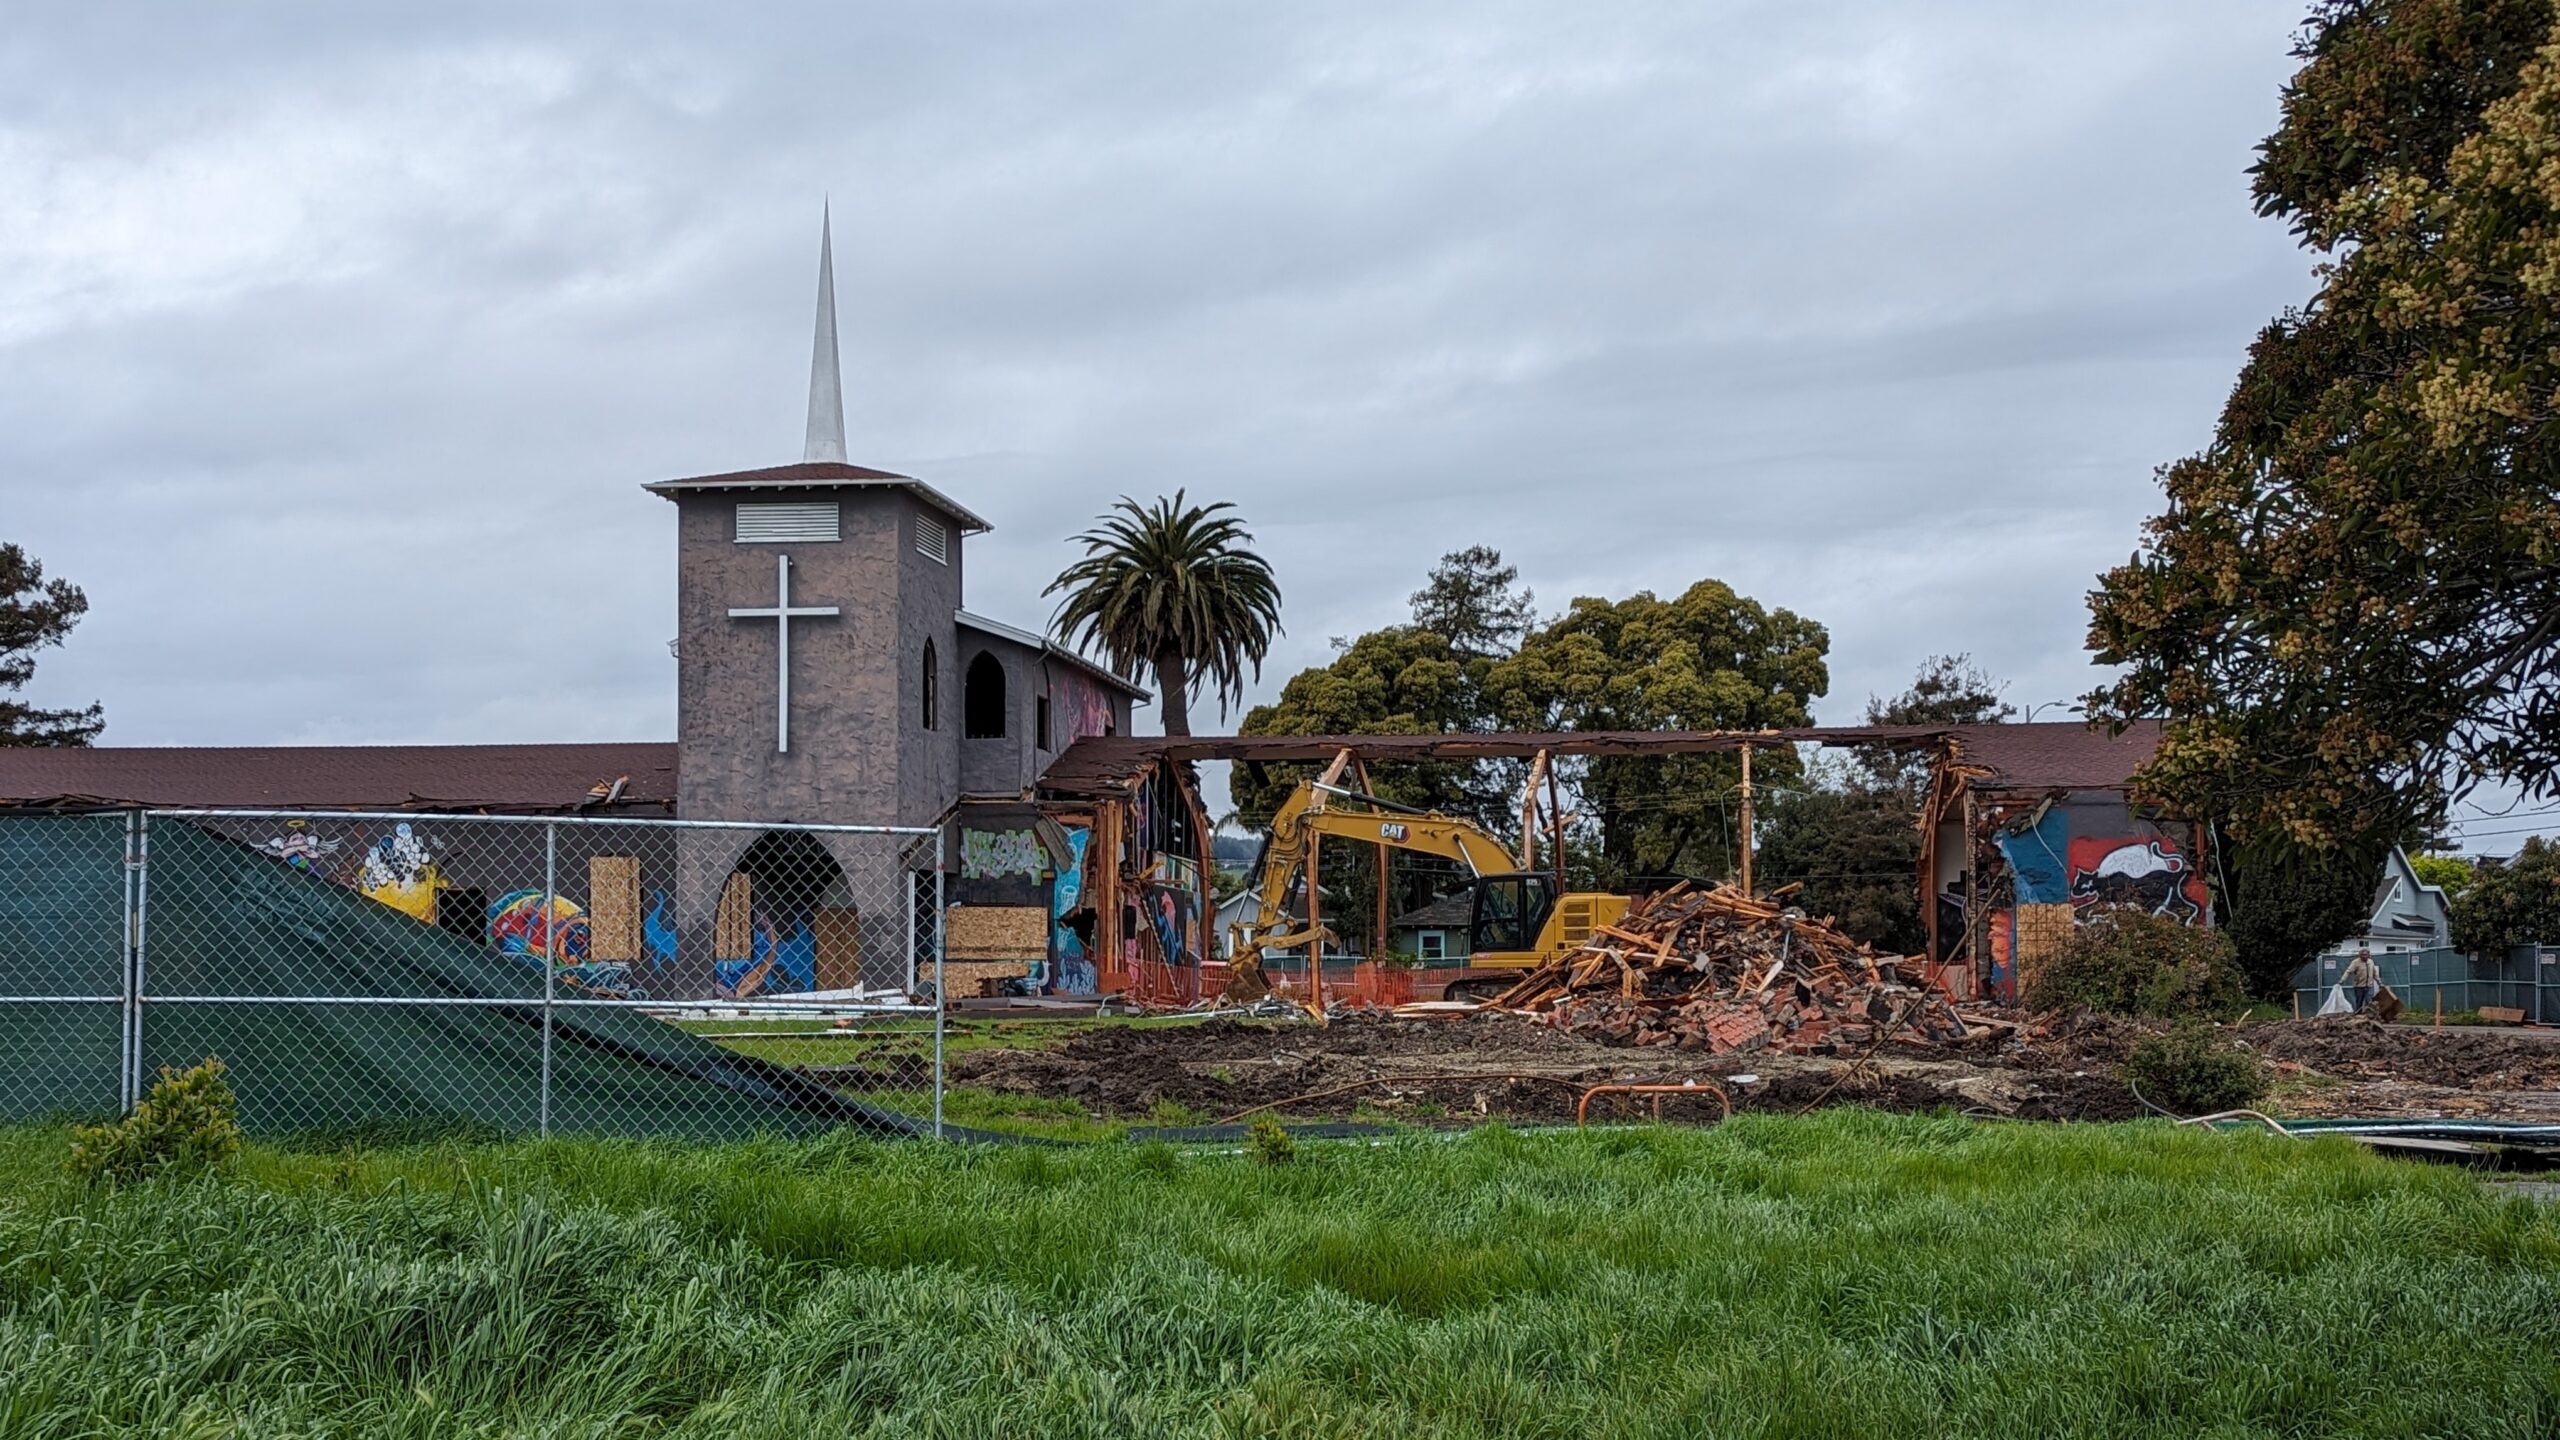 The site of a Circle Church housing redevelopment is partially demolished in this photo.